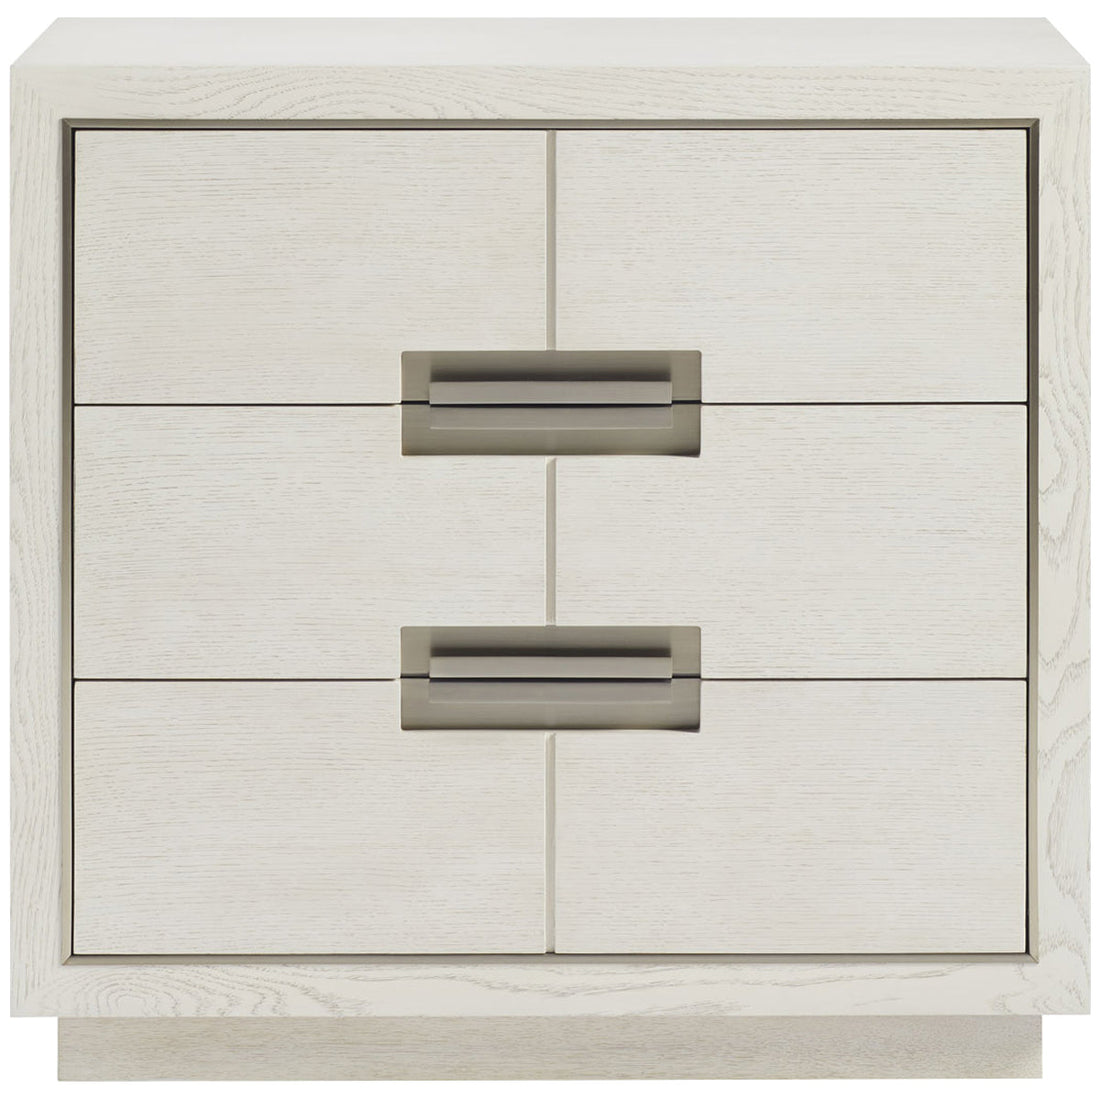 Lillian August Classics Avery 3-Drawer Chest